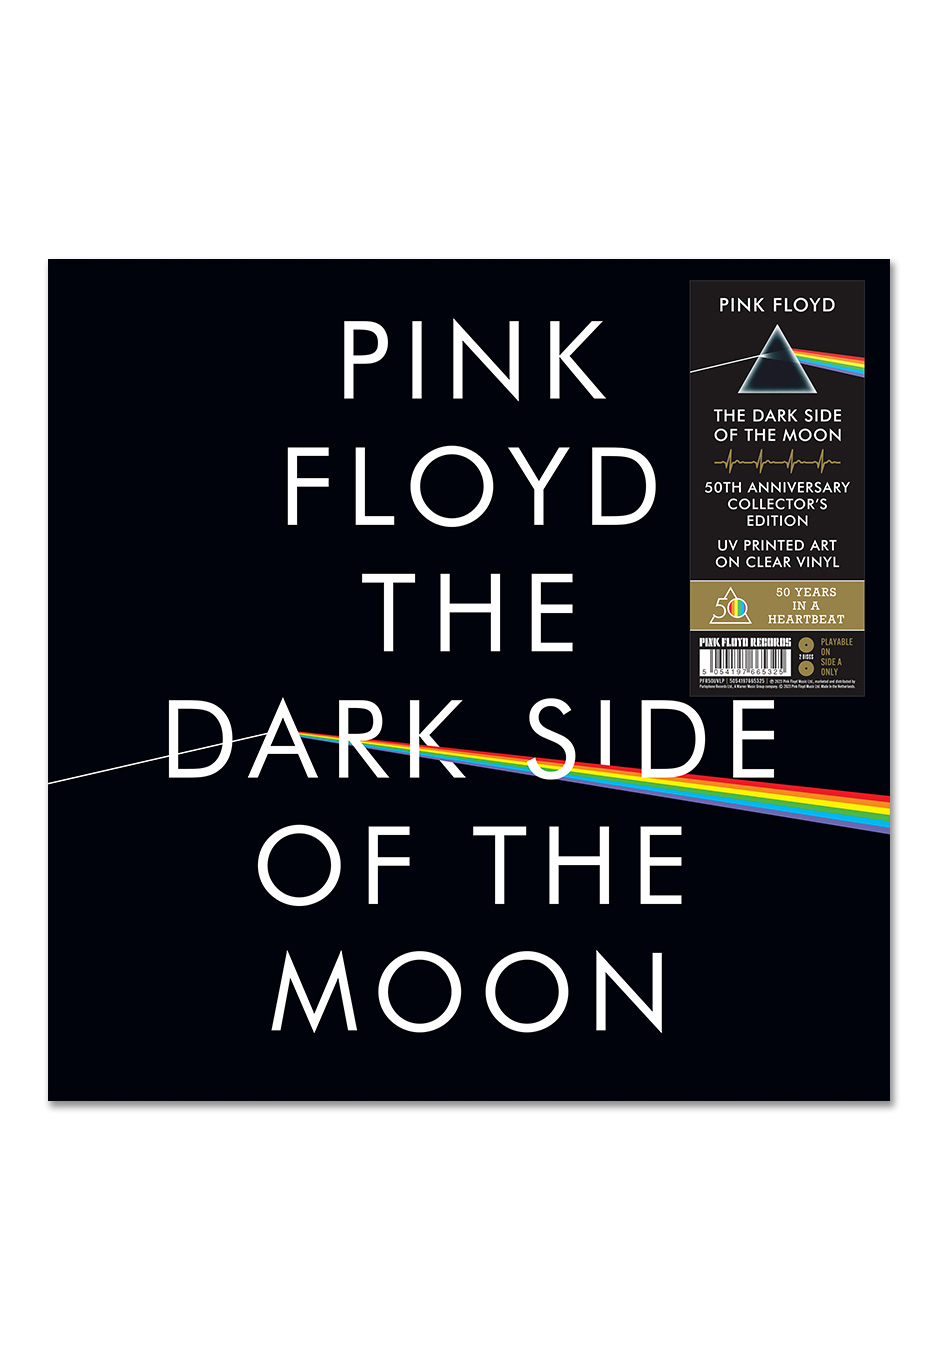 Pink Floyd - The Dark Side Of The Moon (Ltd. 50th Anniversary Collectors Edition) - Picture 2 Vinyl